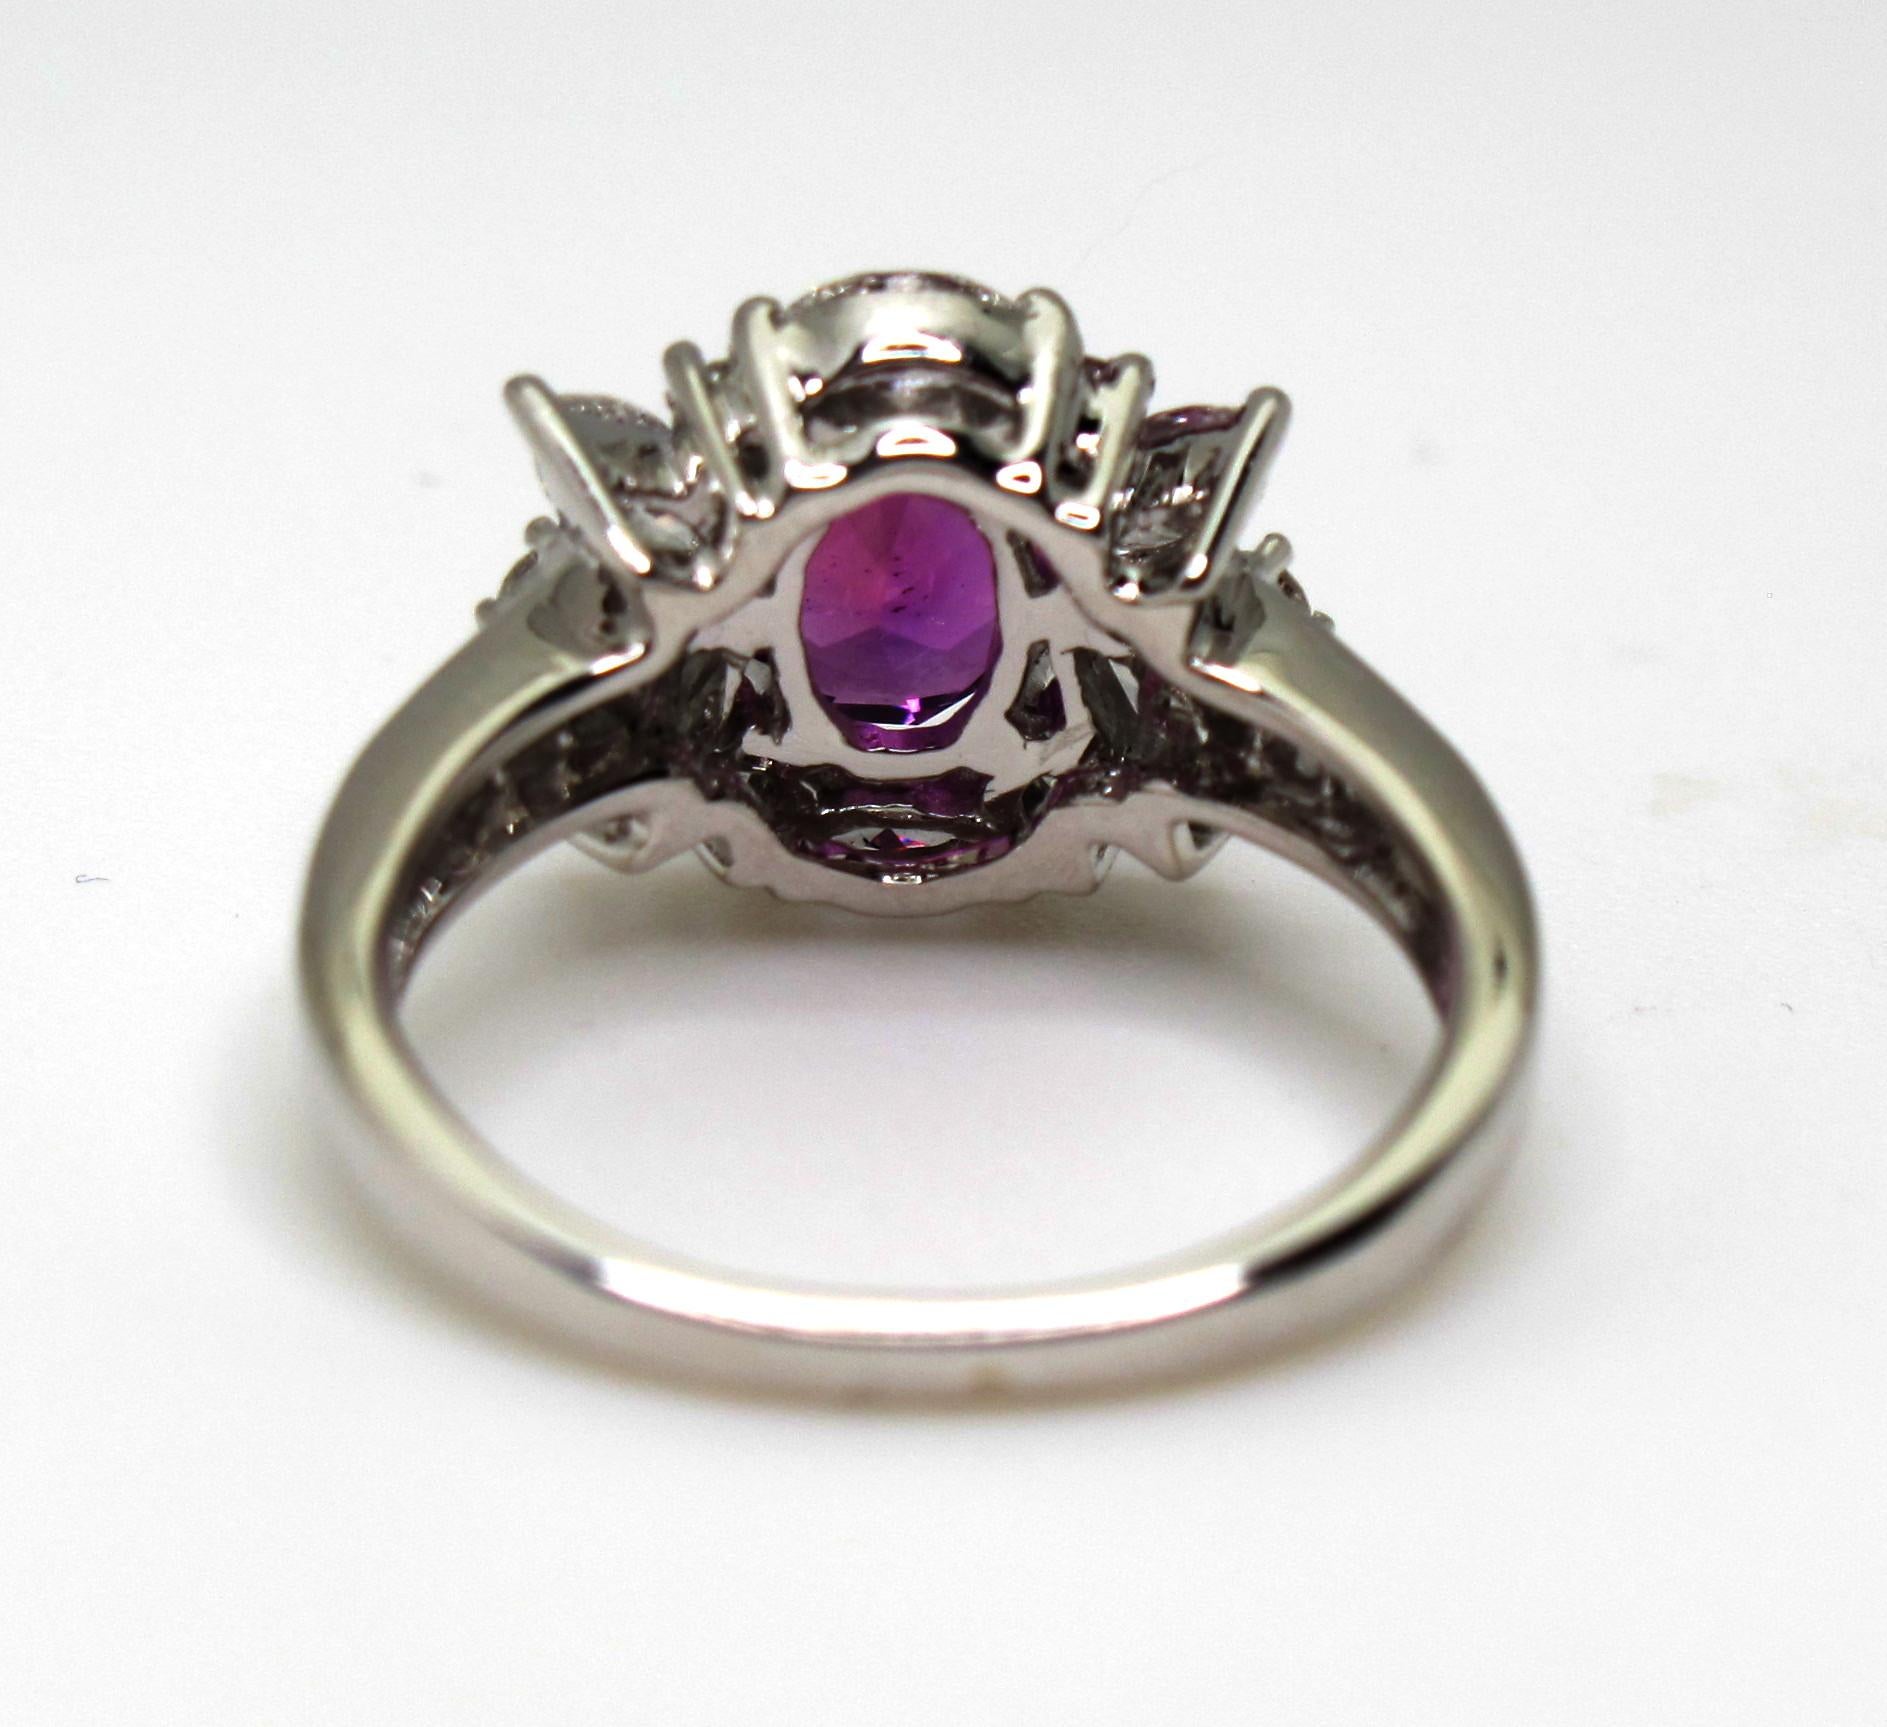 Women's 2.27 ct. Hot Pink Sapphire Oval, Diamond Marquise 18k White Gold Cocktail Ring